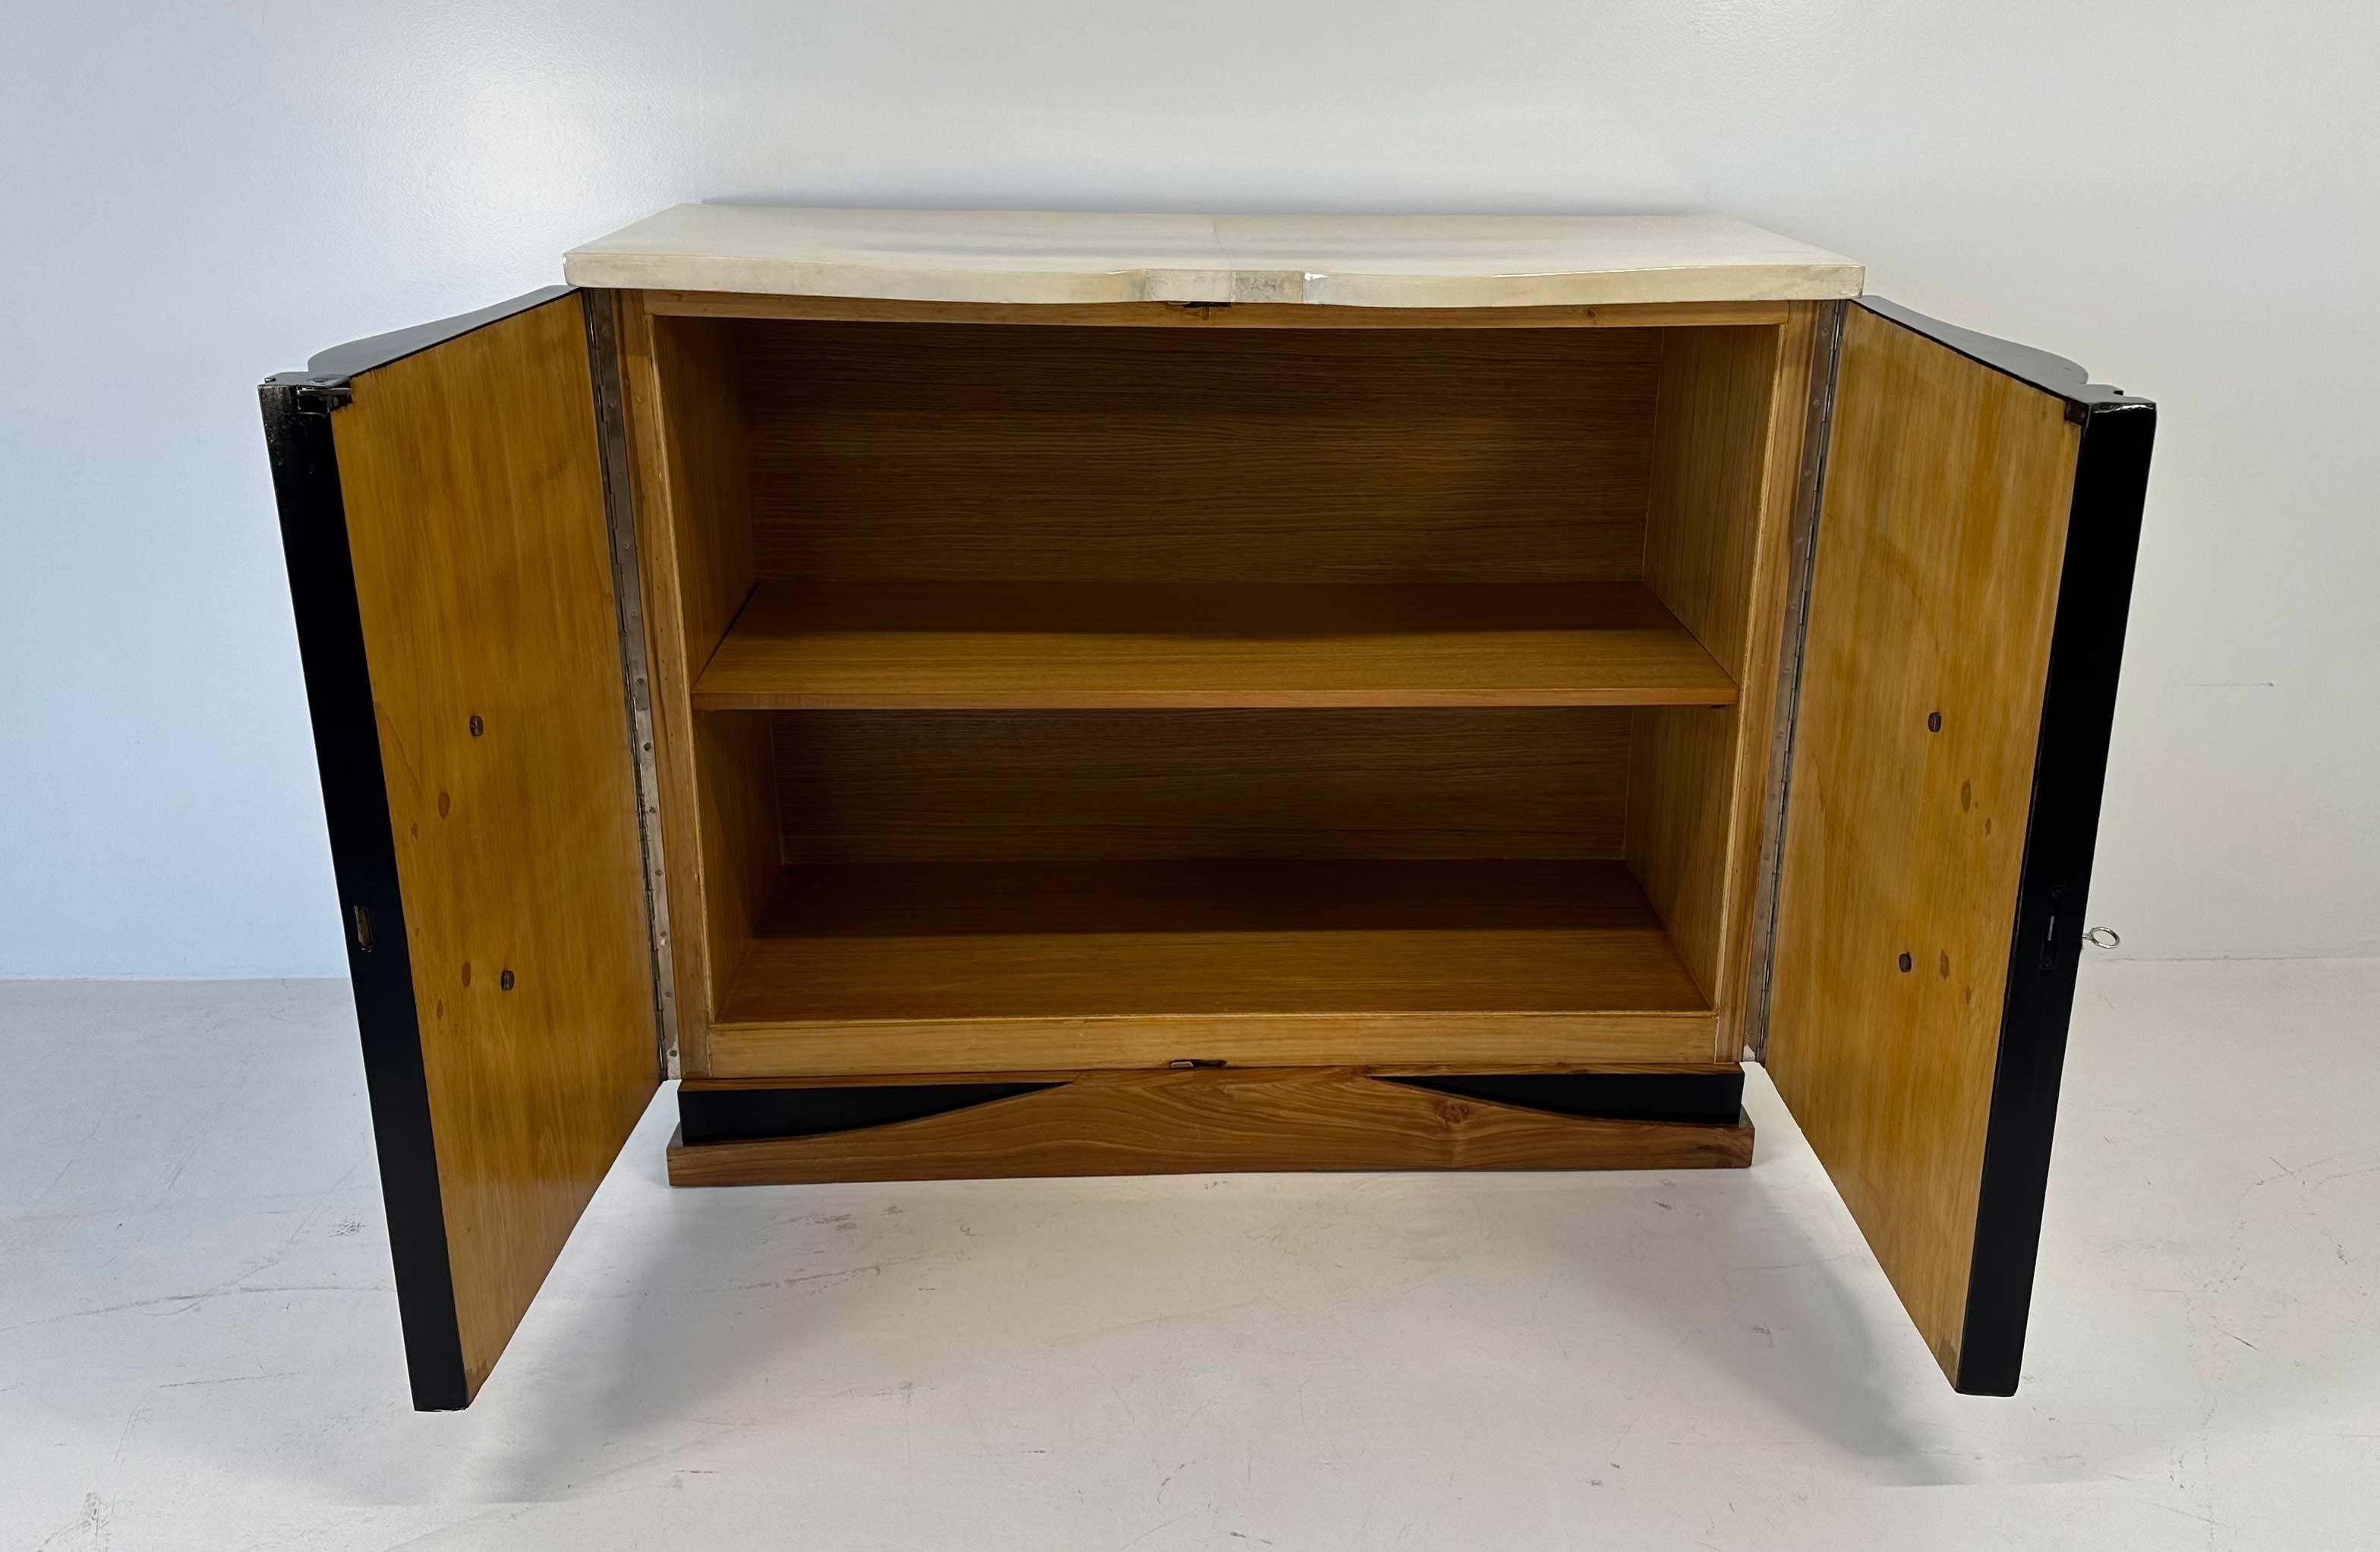 Italian Art Deco Parchment, Walnut and Black Cabinet, Attr. to Ulrich, 1936 For Sale 5